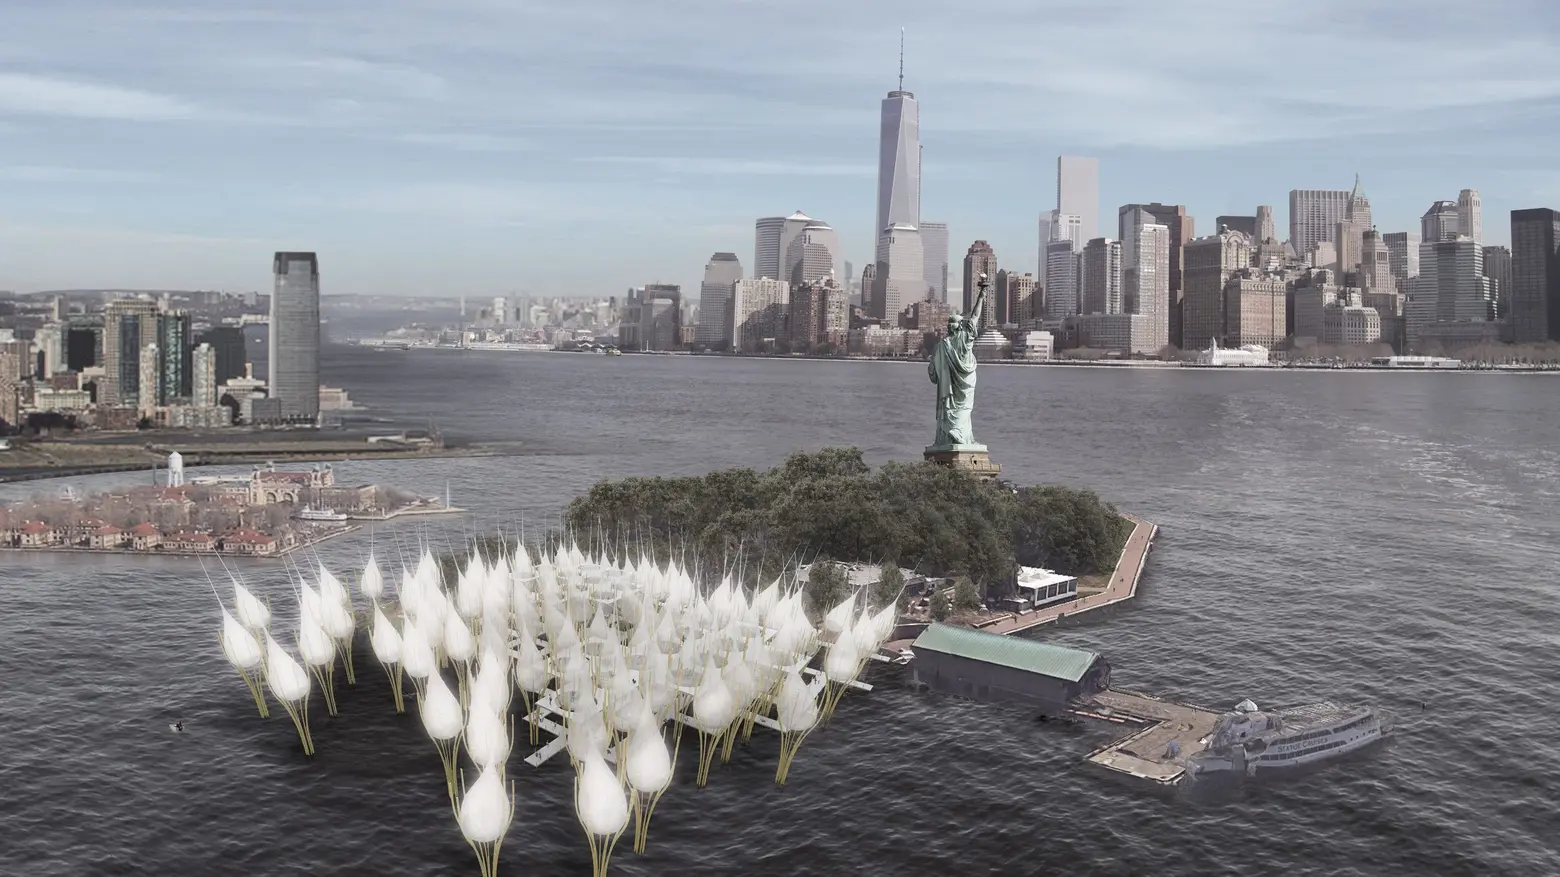 Design proposal for the Statue of Liberty Museum ‘points’ to social injustice in real time